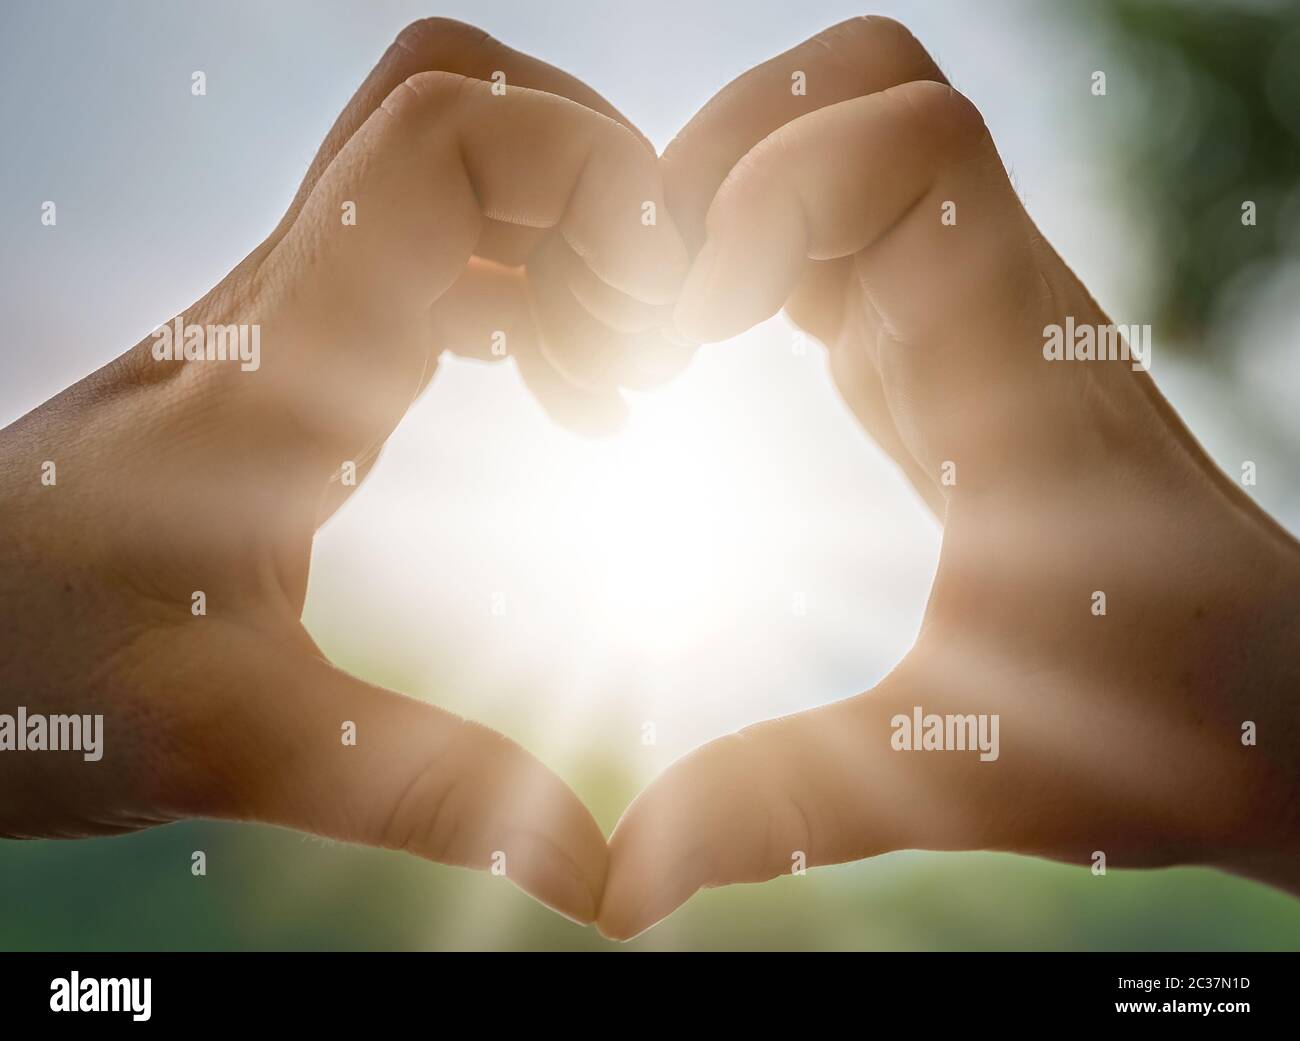 Womans hands catching sunlight sunrays while making heart shape Stock Photo